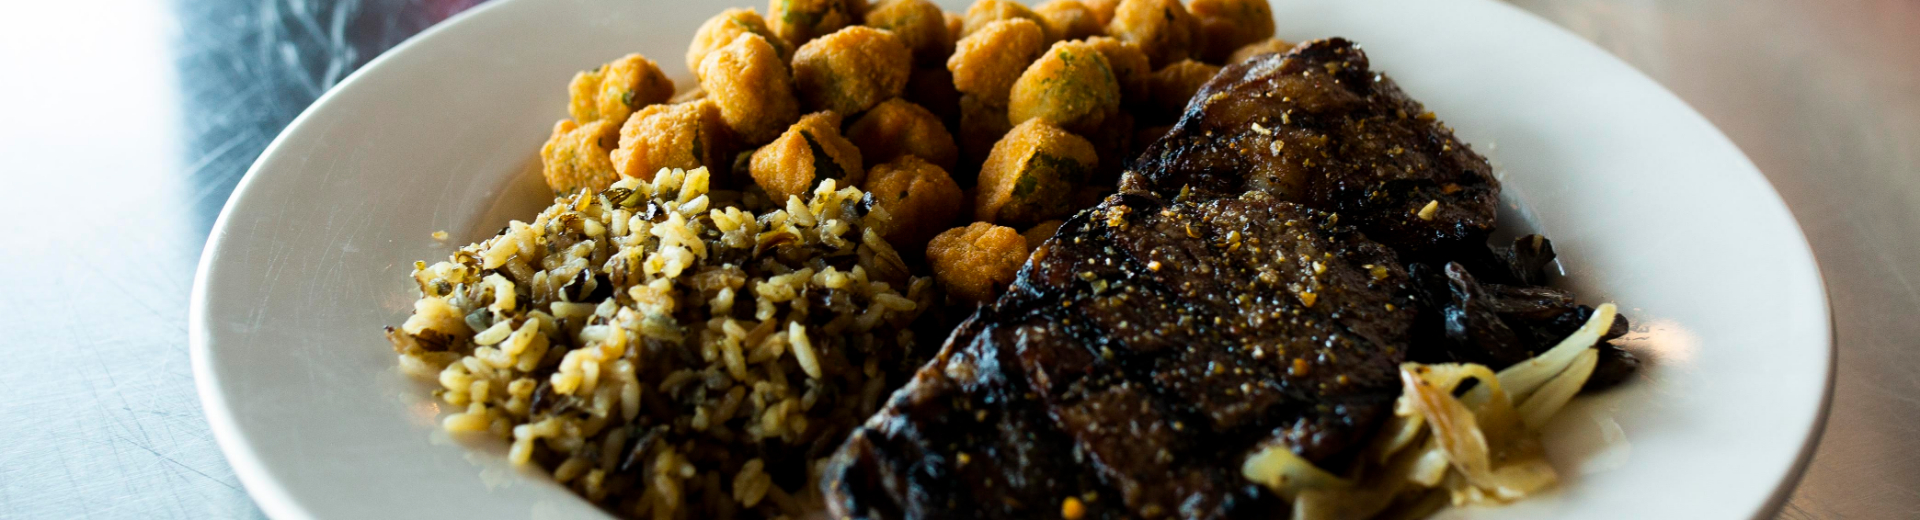 A plate of steak, rice and fried okra, prepared by House Divided